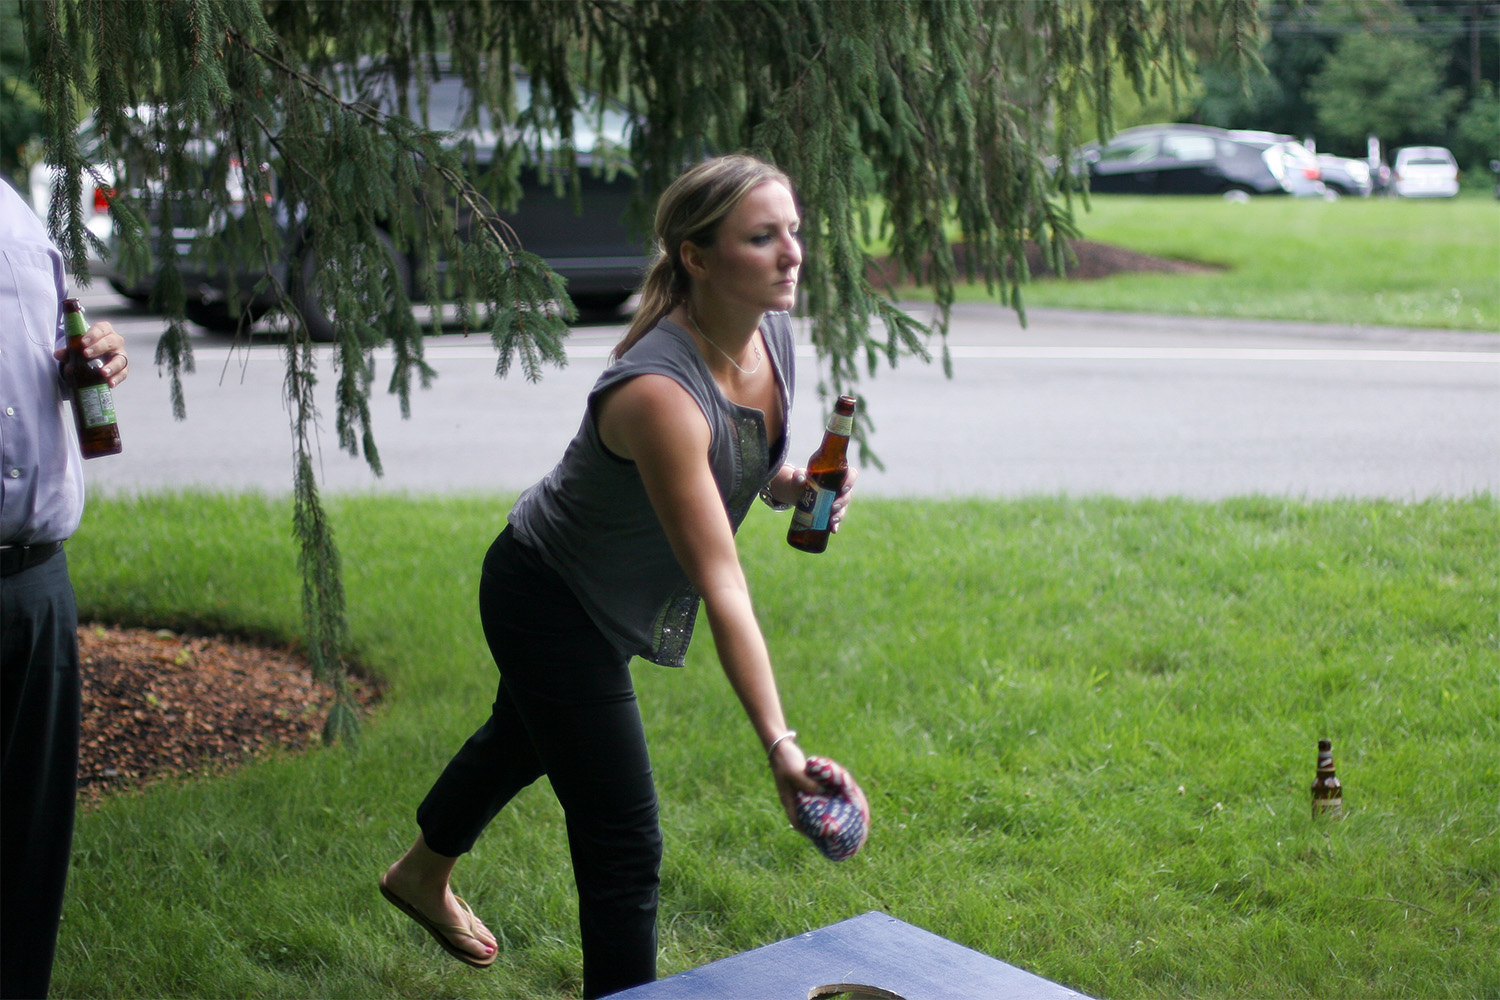 woman is leaning down, preparing to throw a sack into the cornhole 